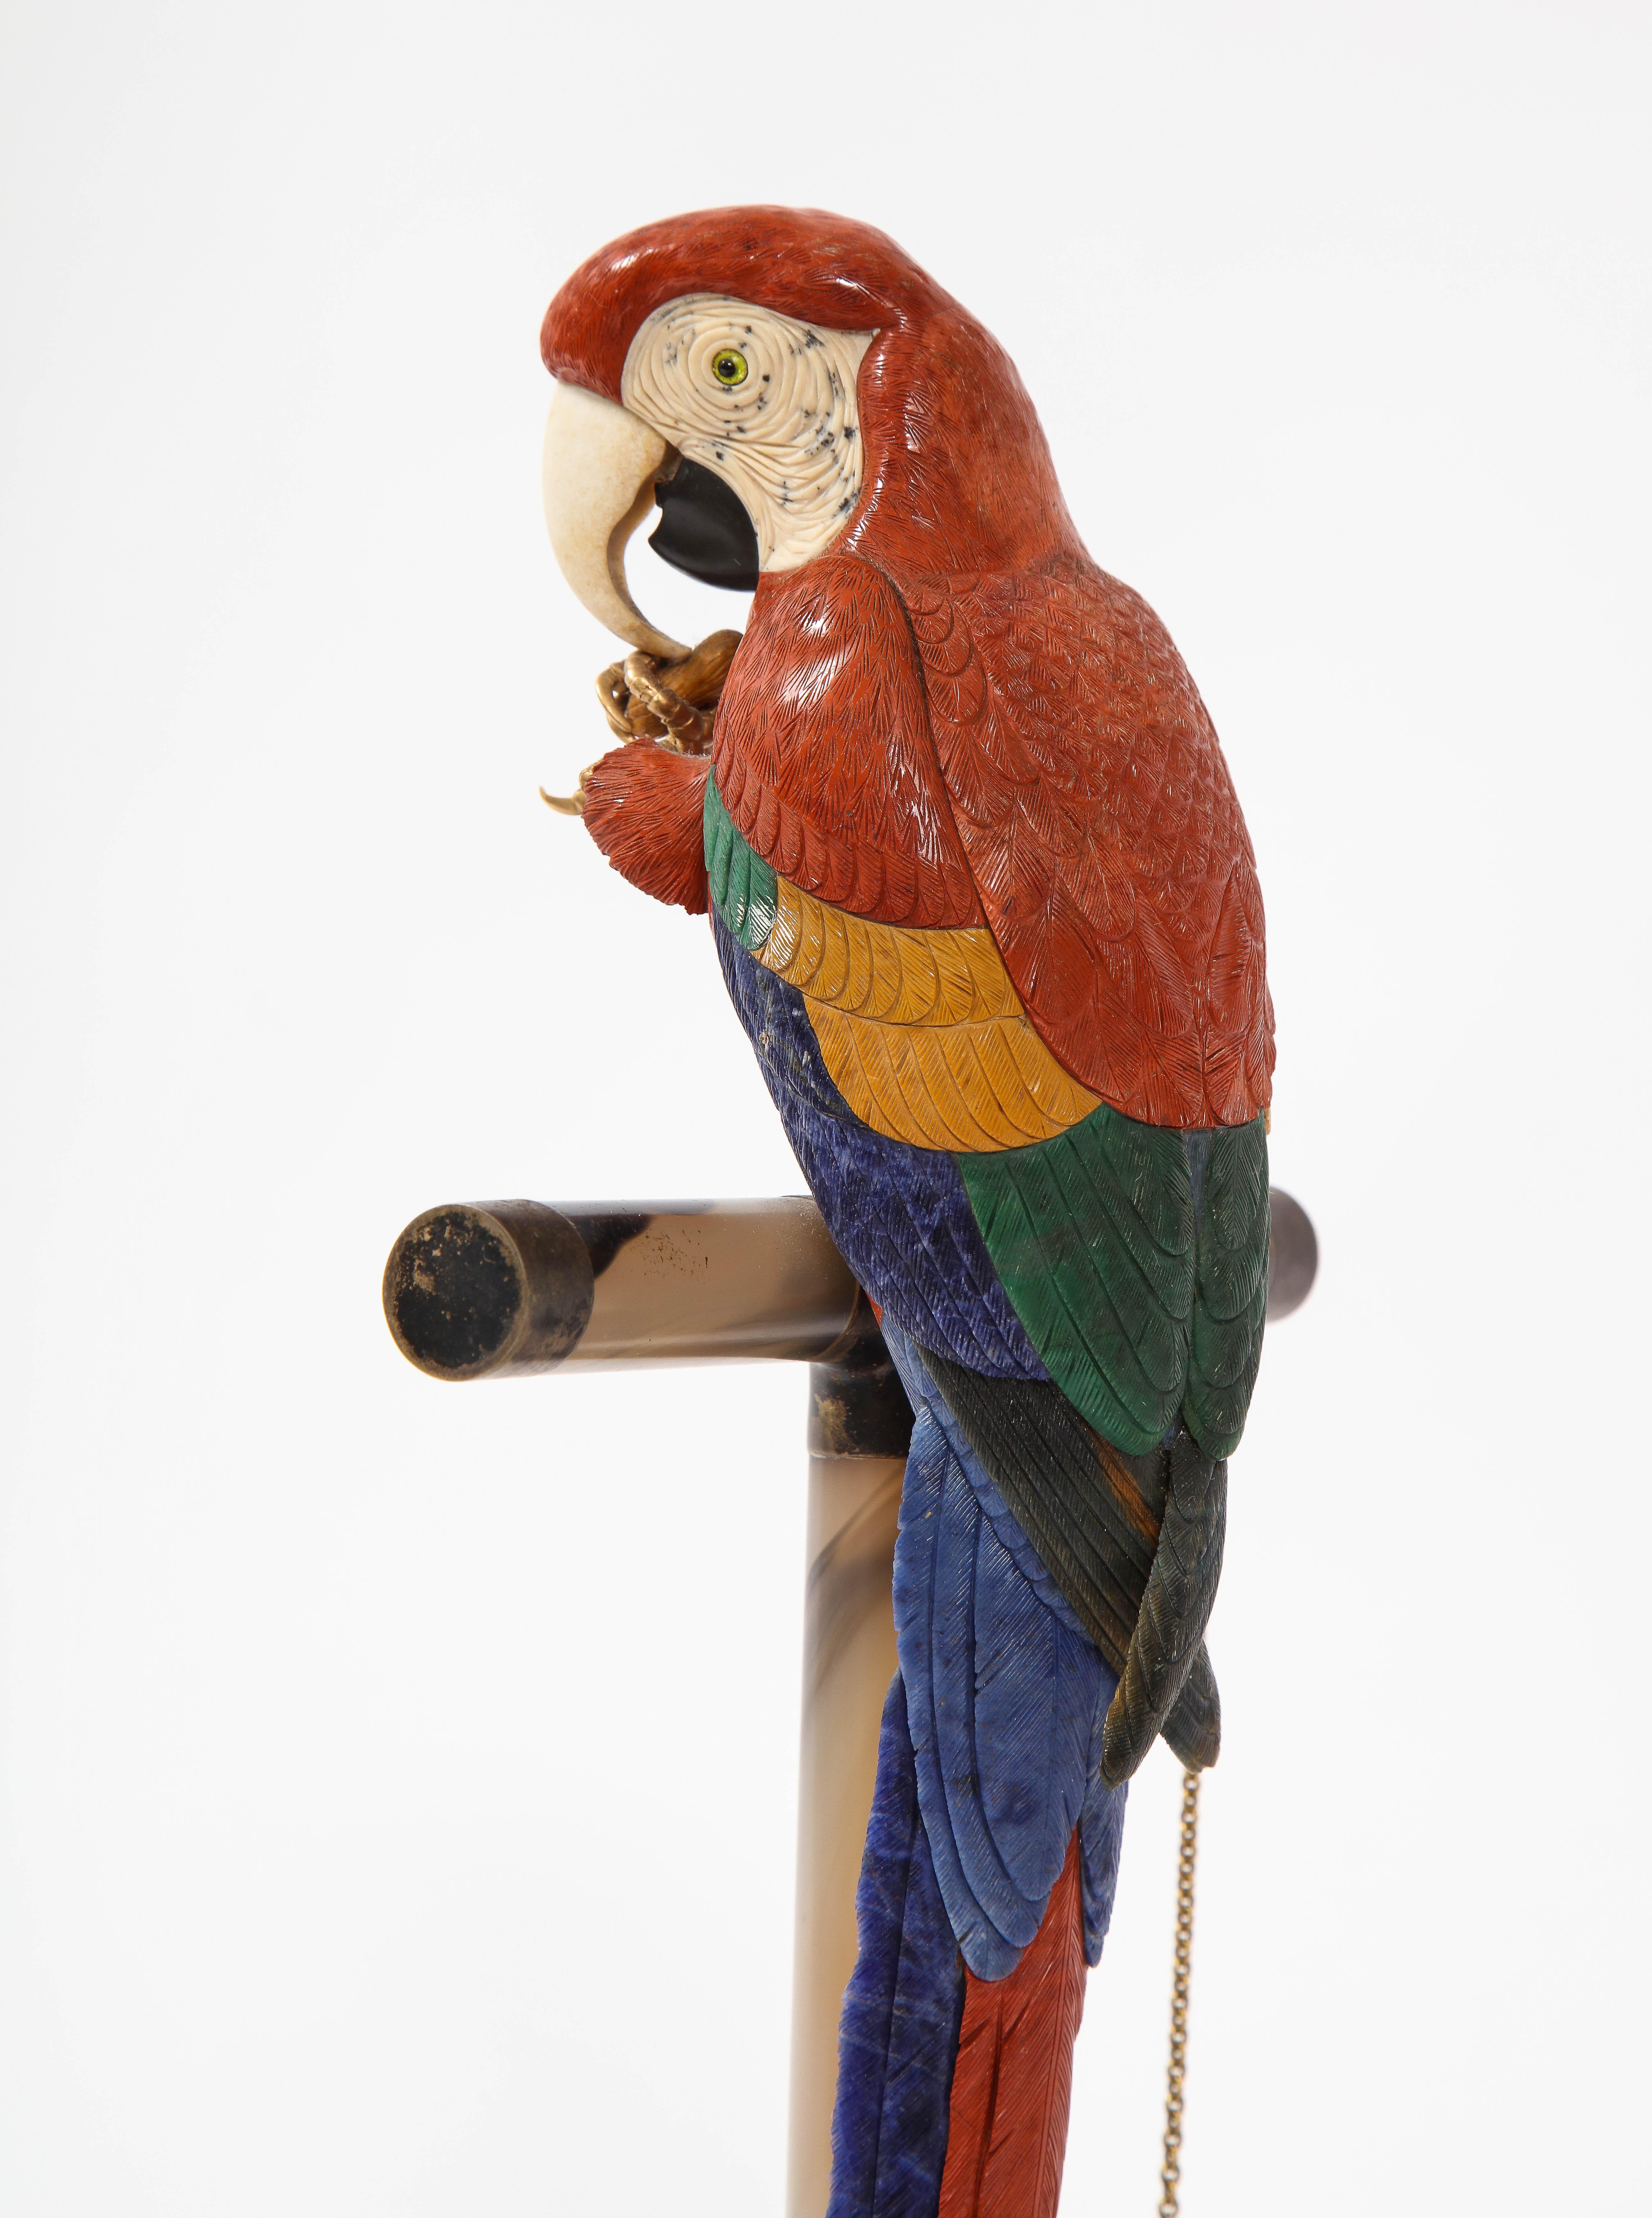 Siena Marble Semi Precious Stone & Metal Model of a Scarlet Macaw Parrot, P. Müller, Swiss